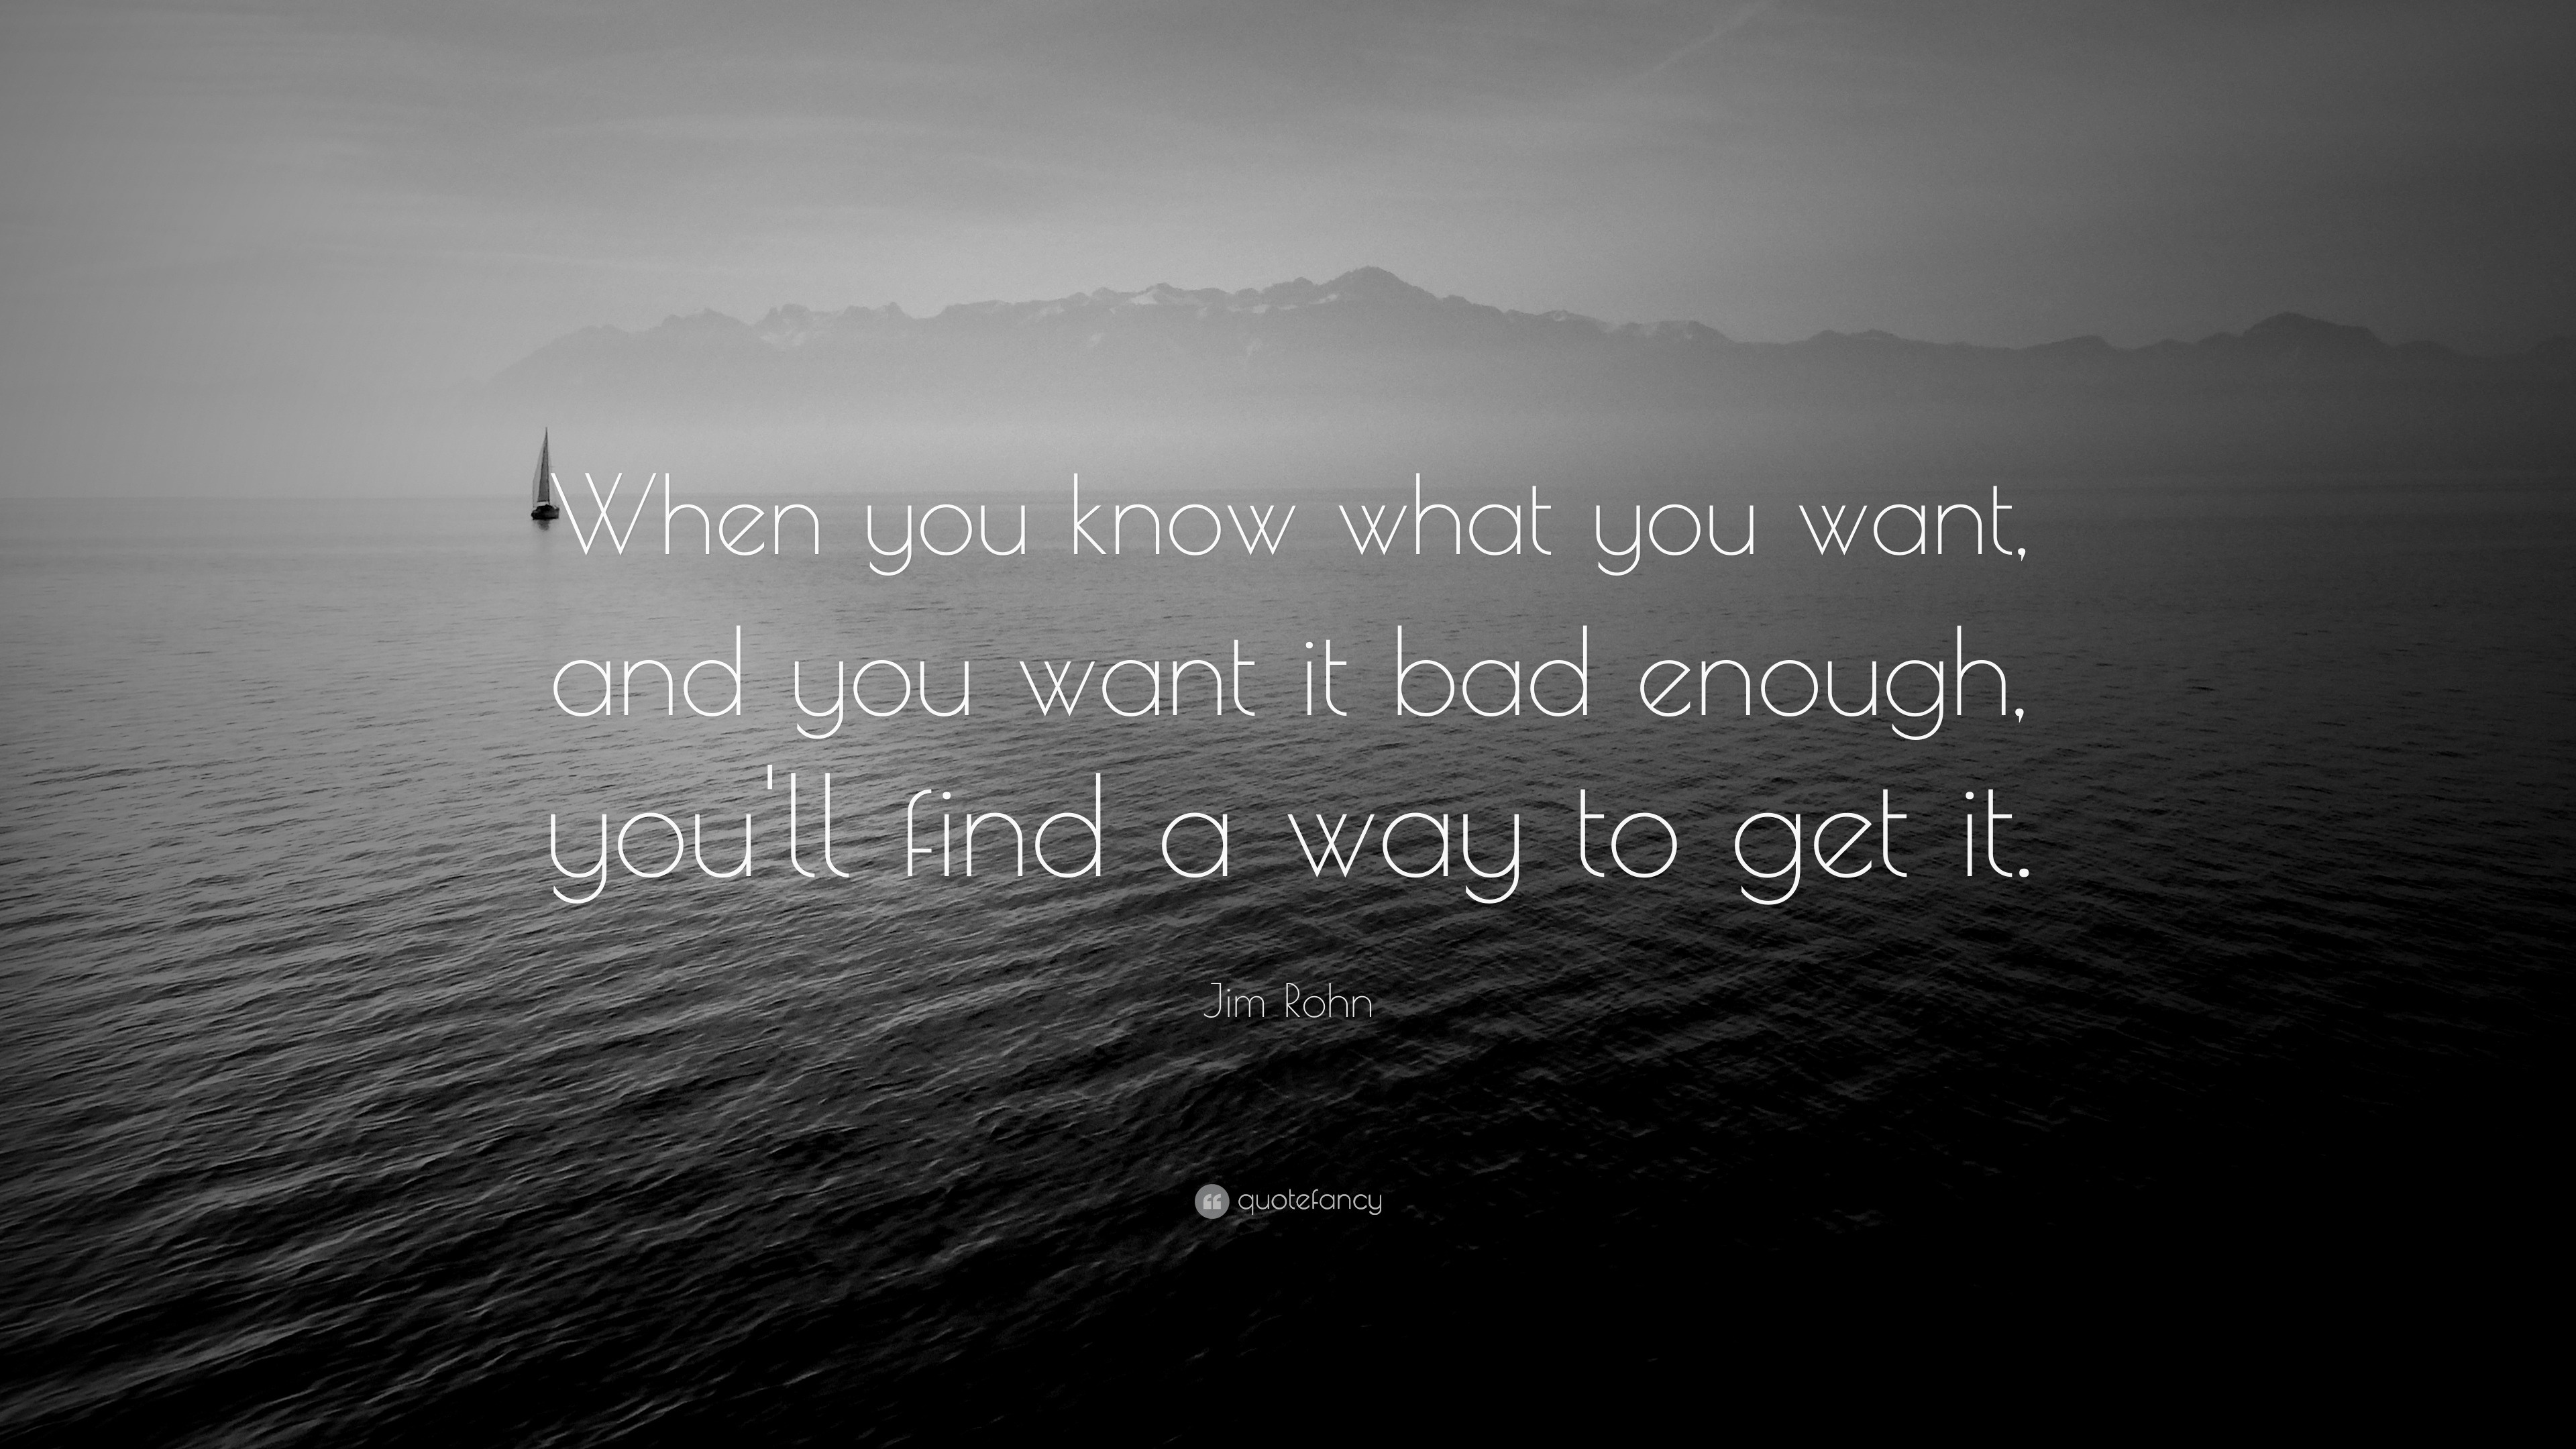 Jim Rohn Quote: “When you know what you want, and you want it bad